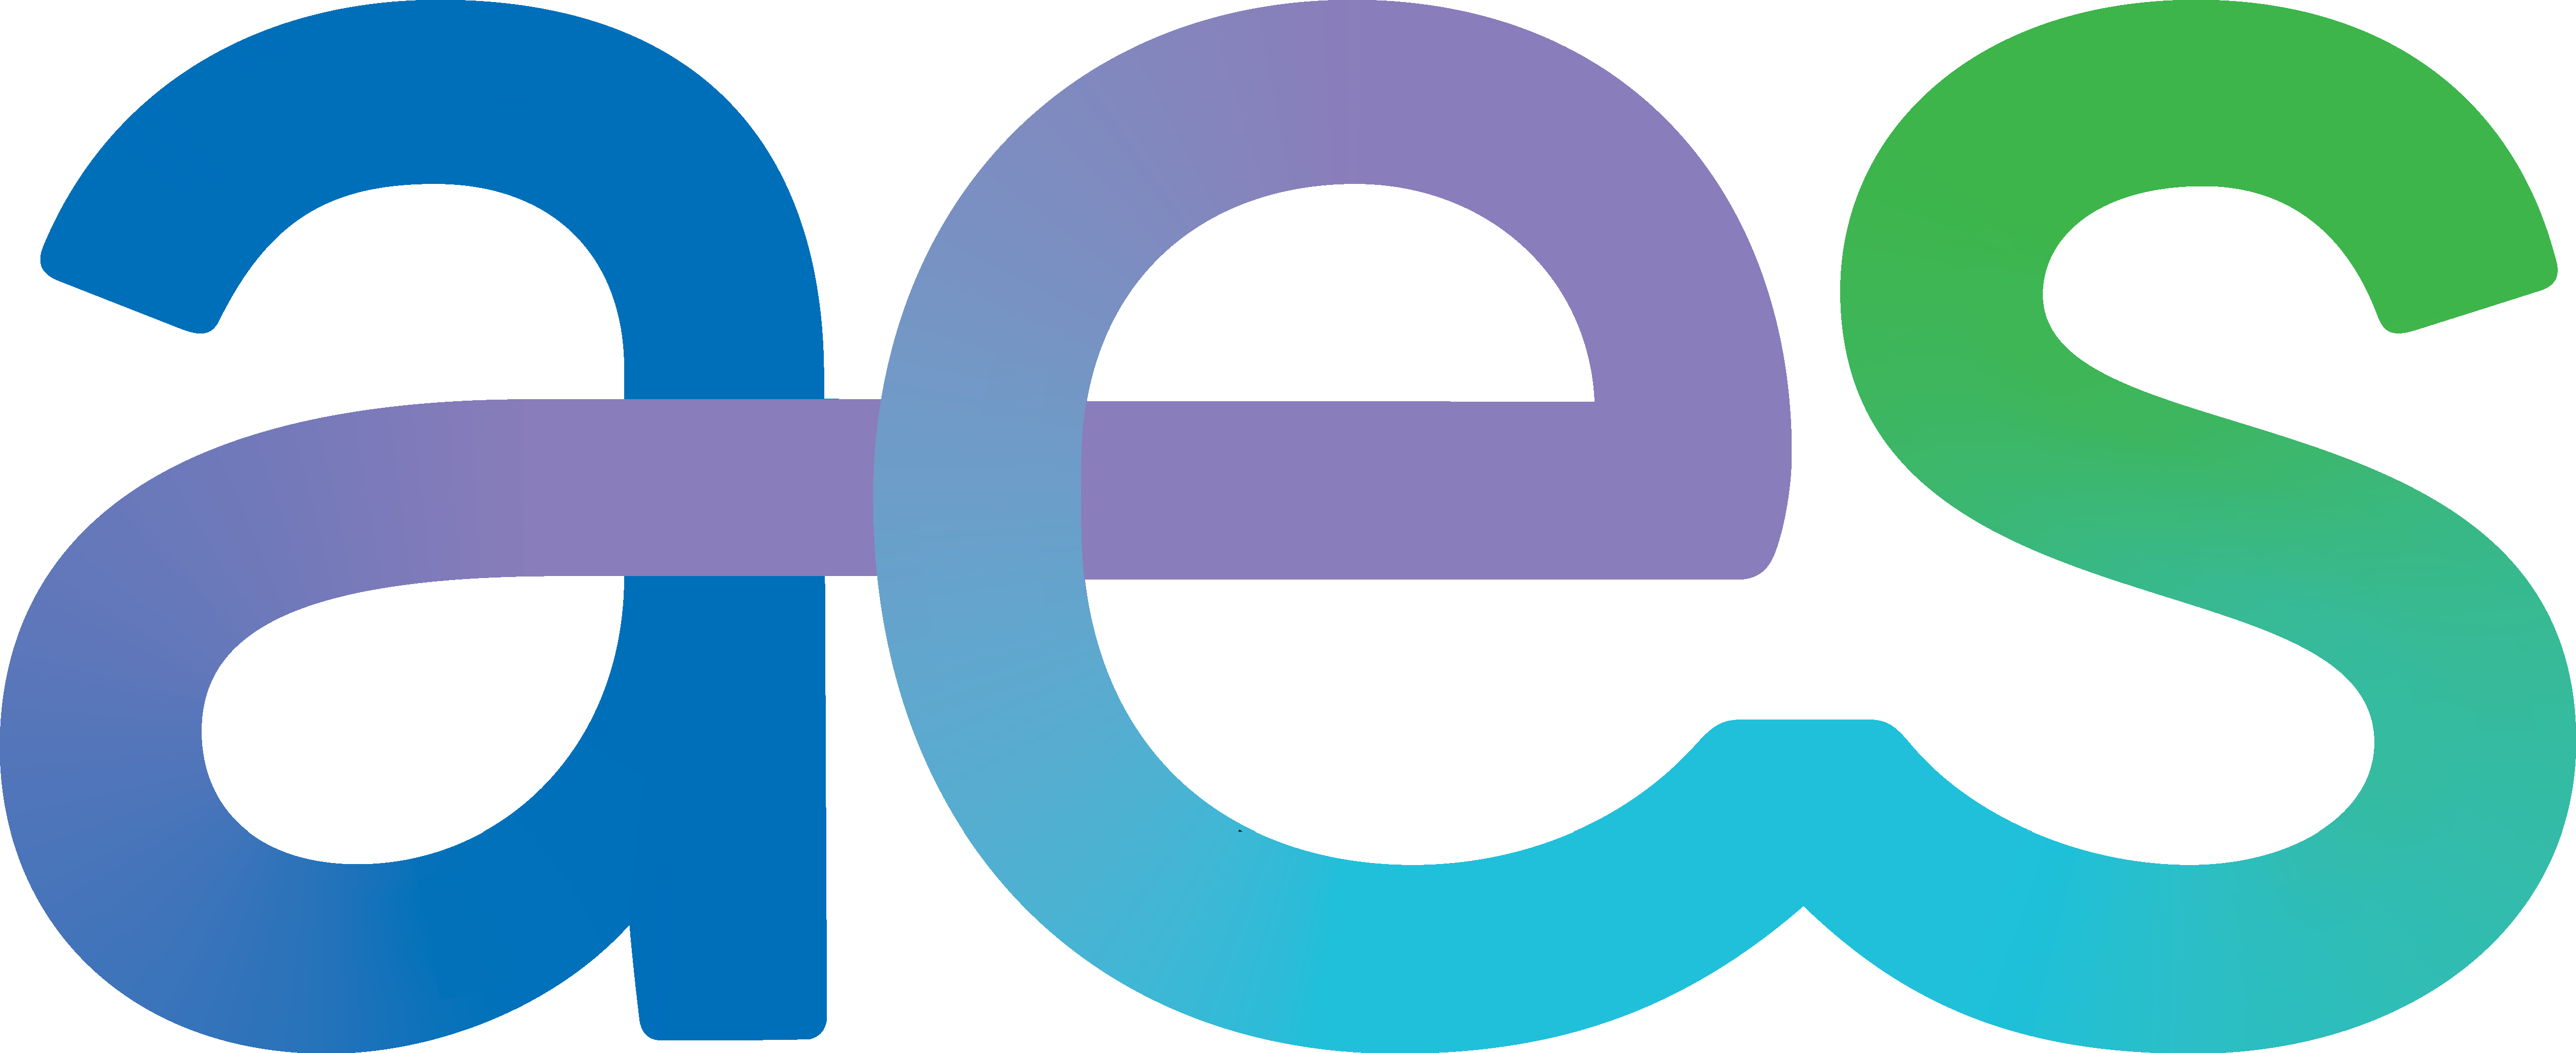 aes_new_logo-cmyk.png